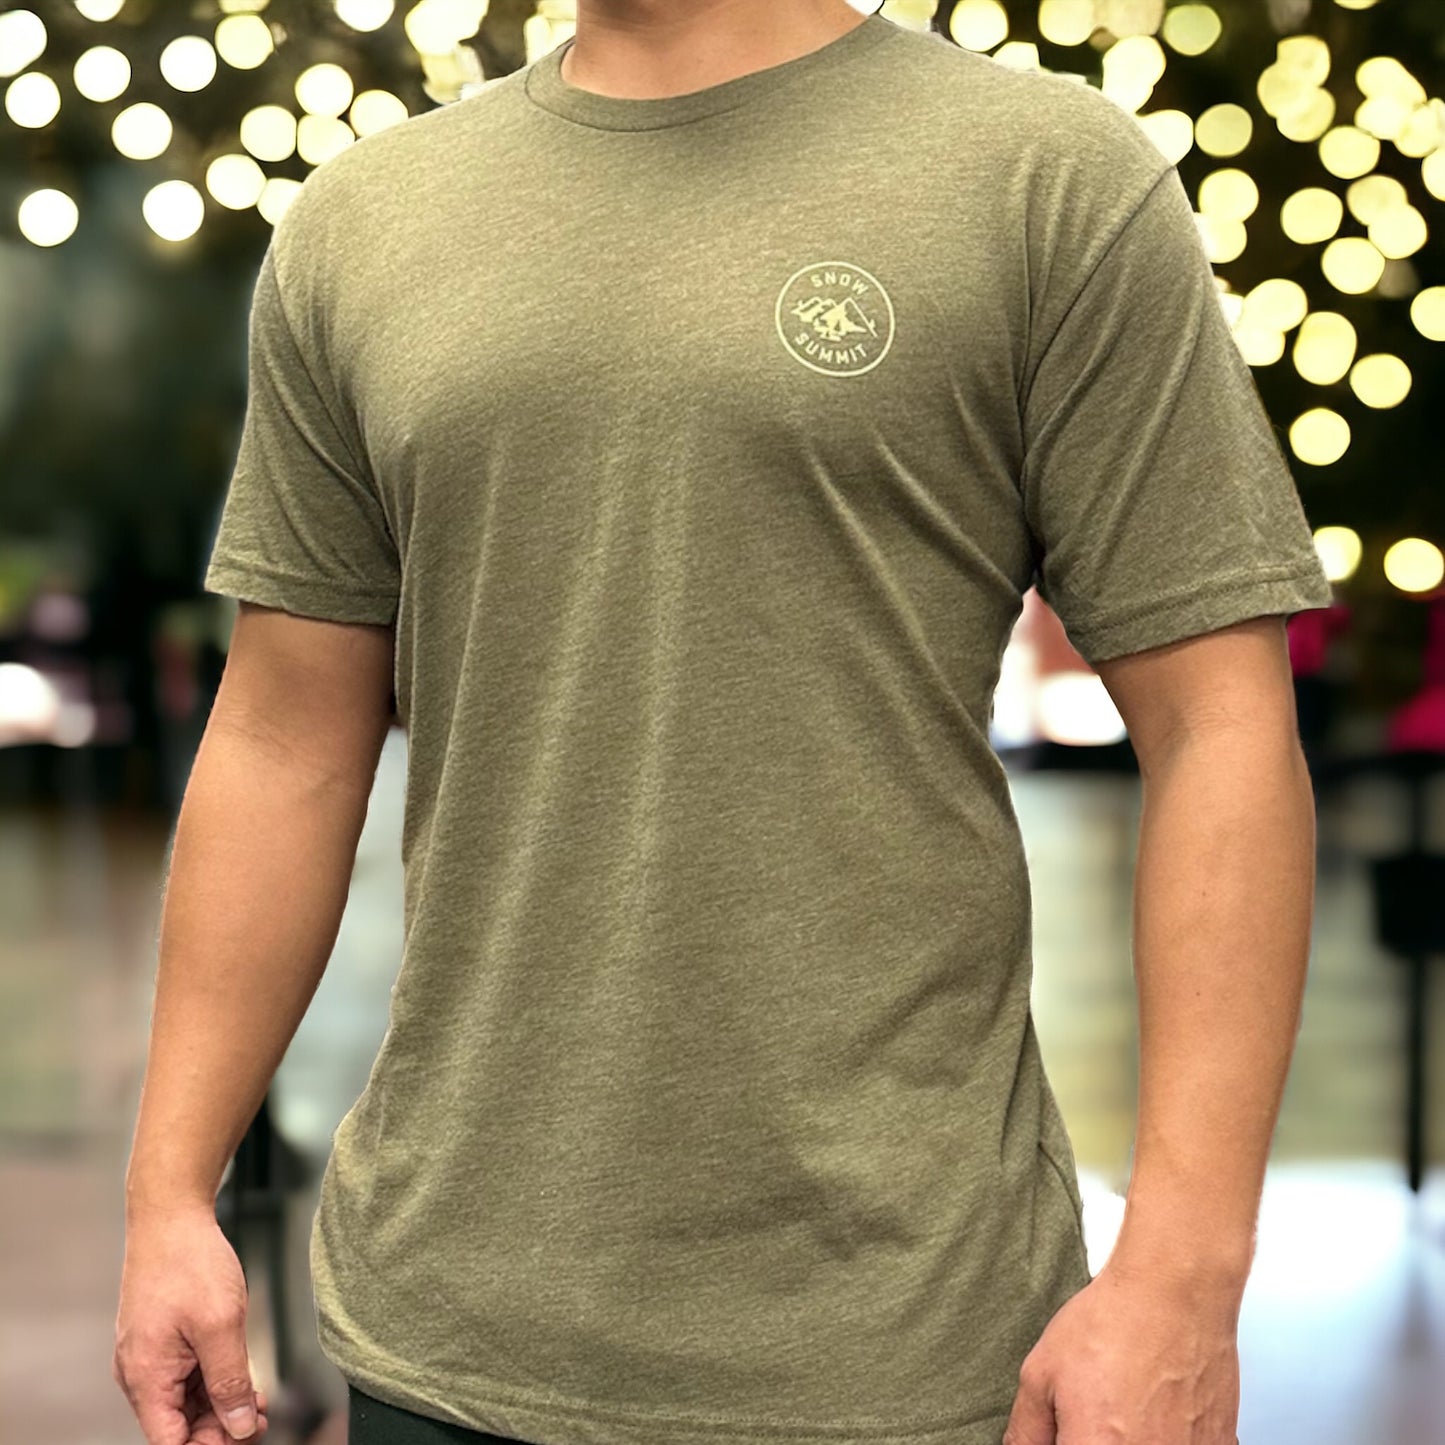 Snow Summit small logo over heart tee shirt in military green